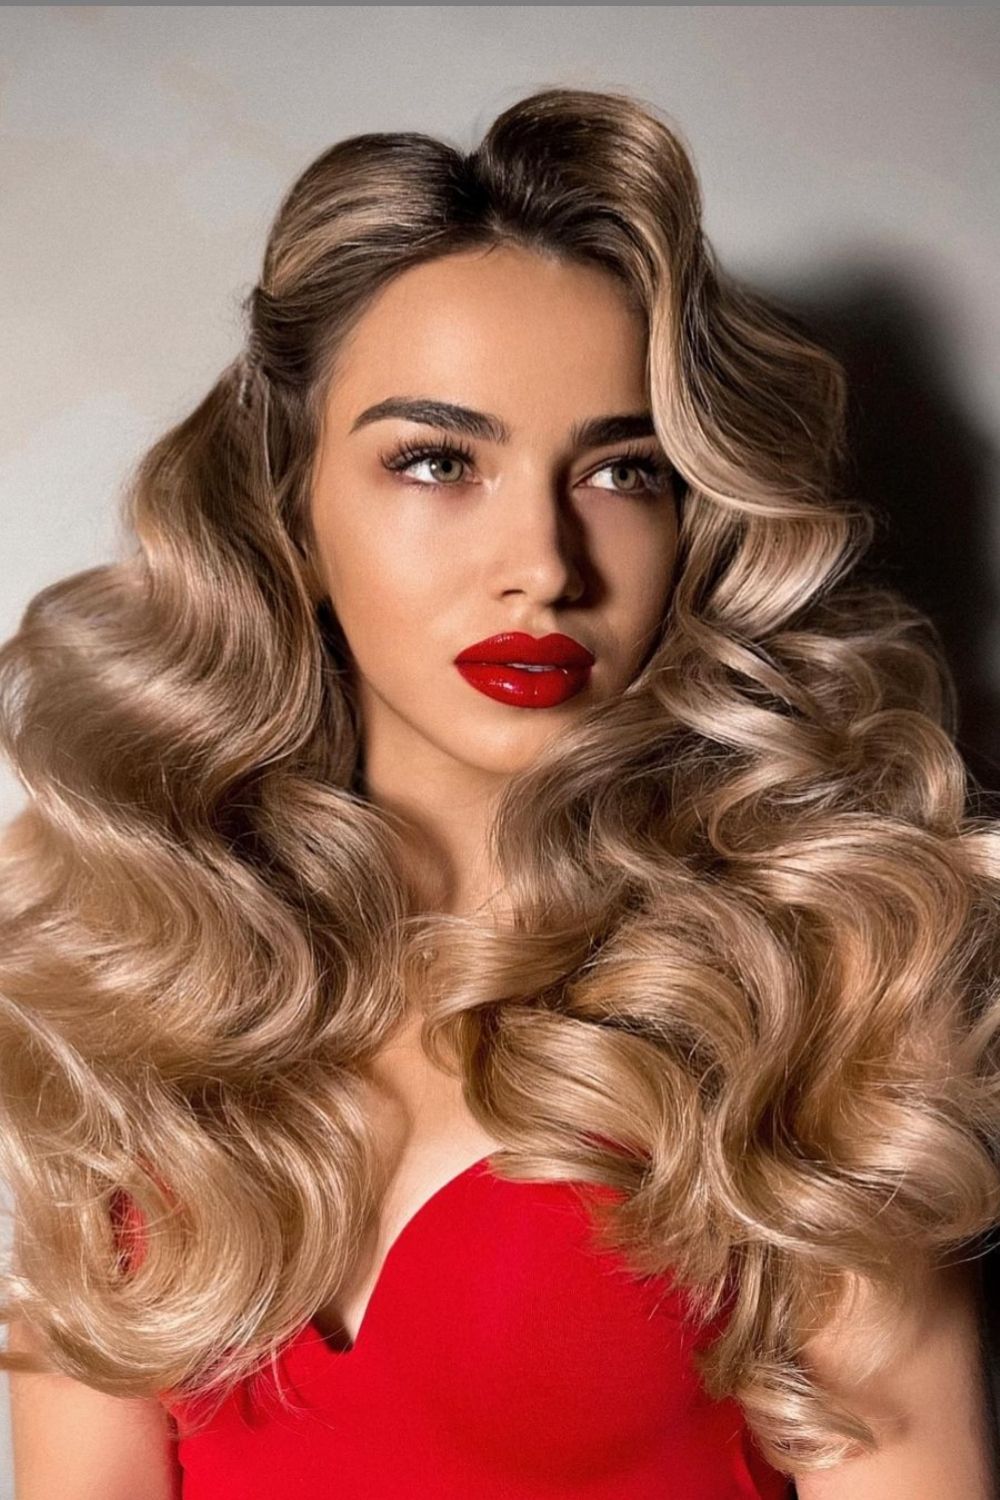 38 Chic Prom Hairstyles for long hair with retro curls  to Let You Be Amazing